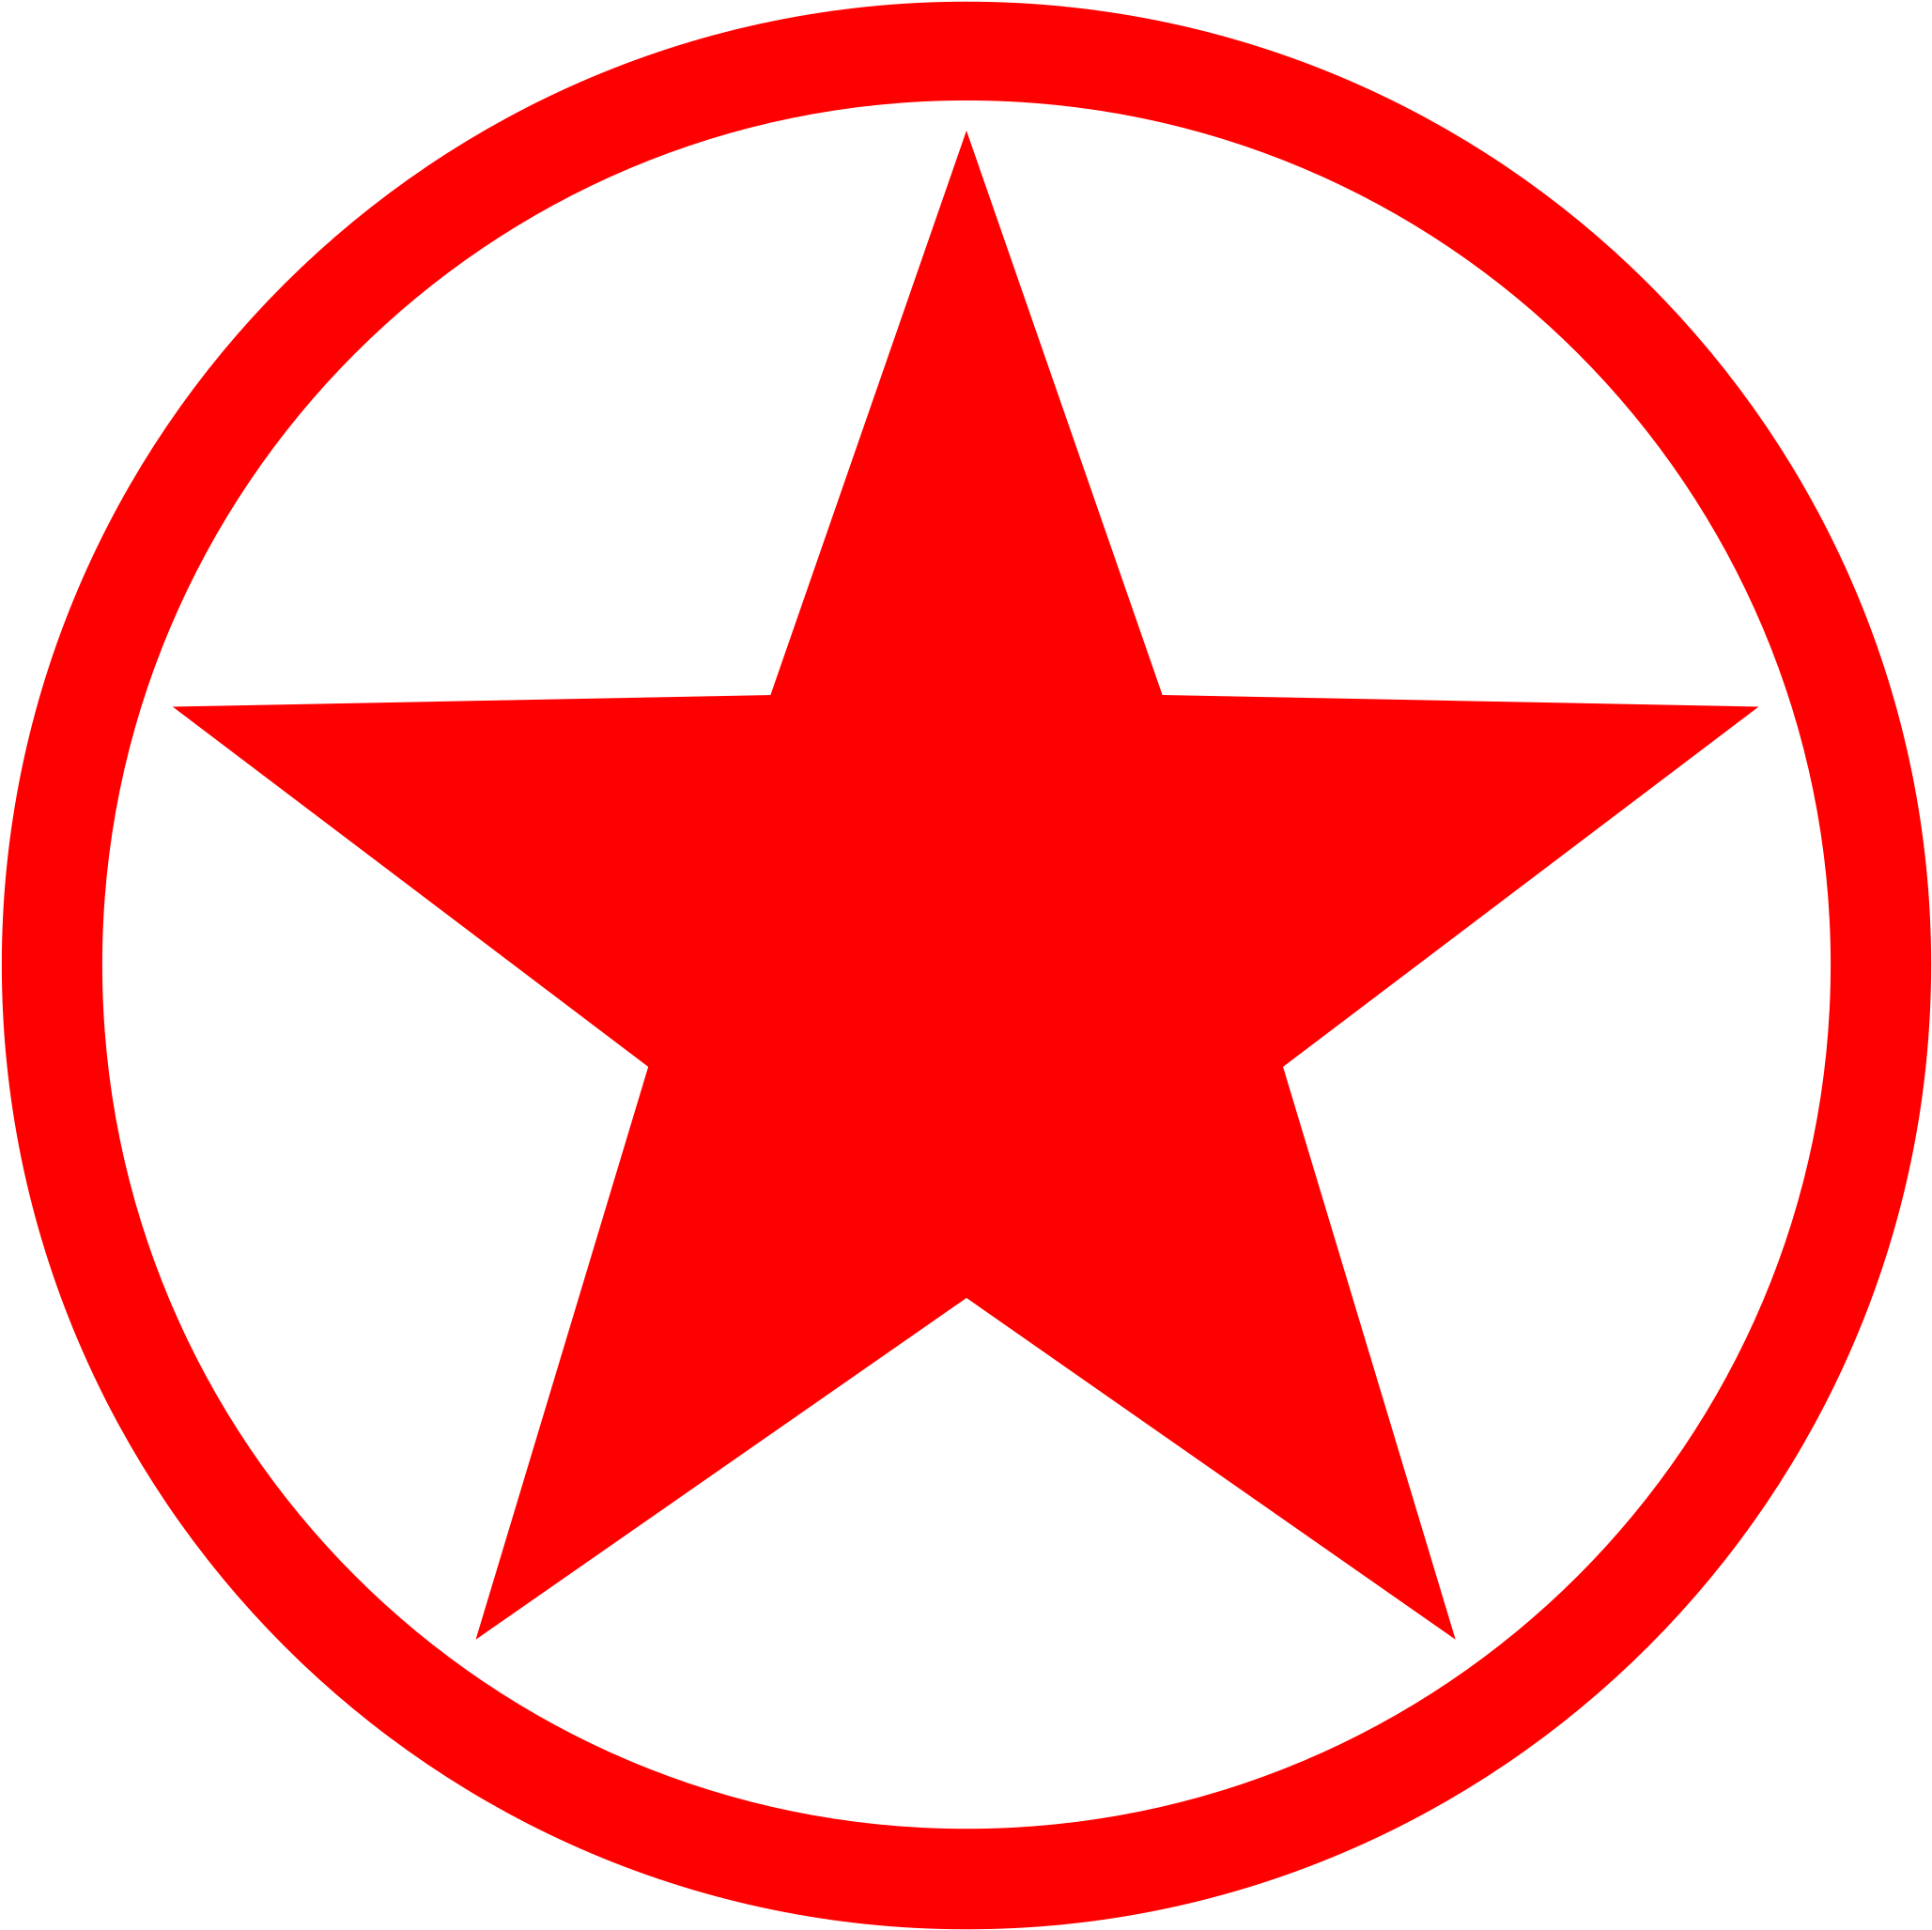 Star Circle Border Clipart Star Circle Clipart Cl - Red Star With Circle Around (2402x2400)